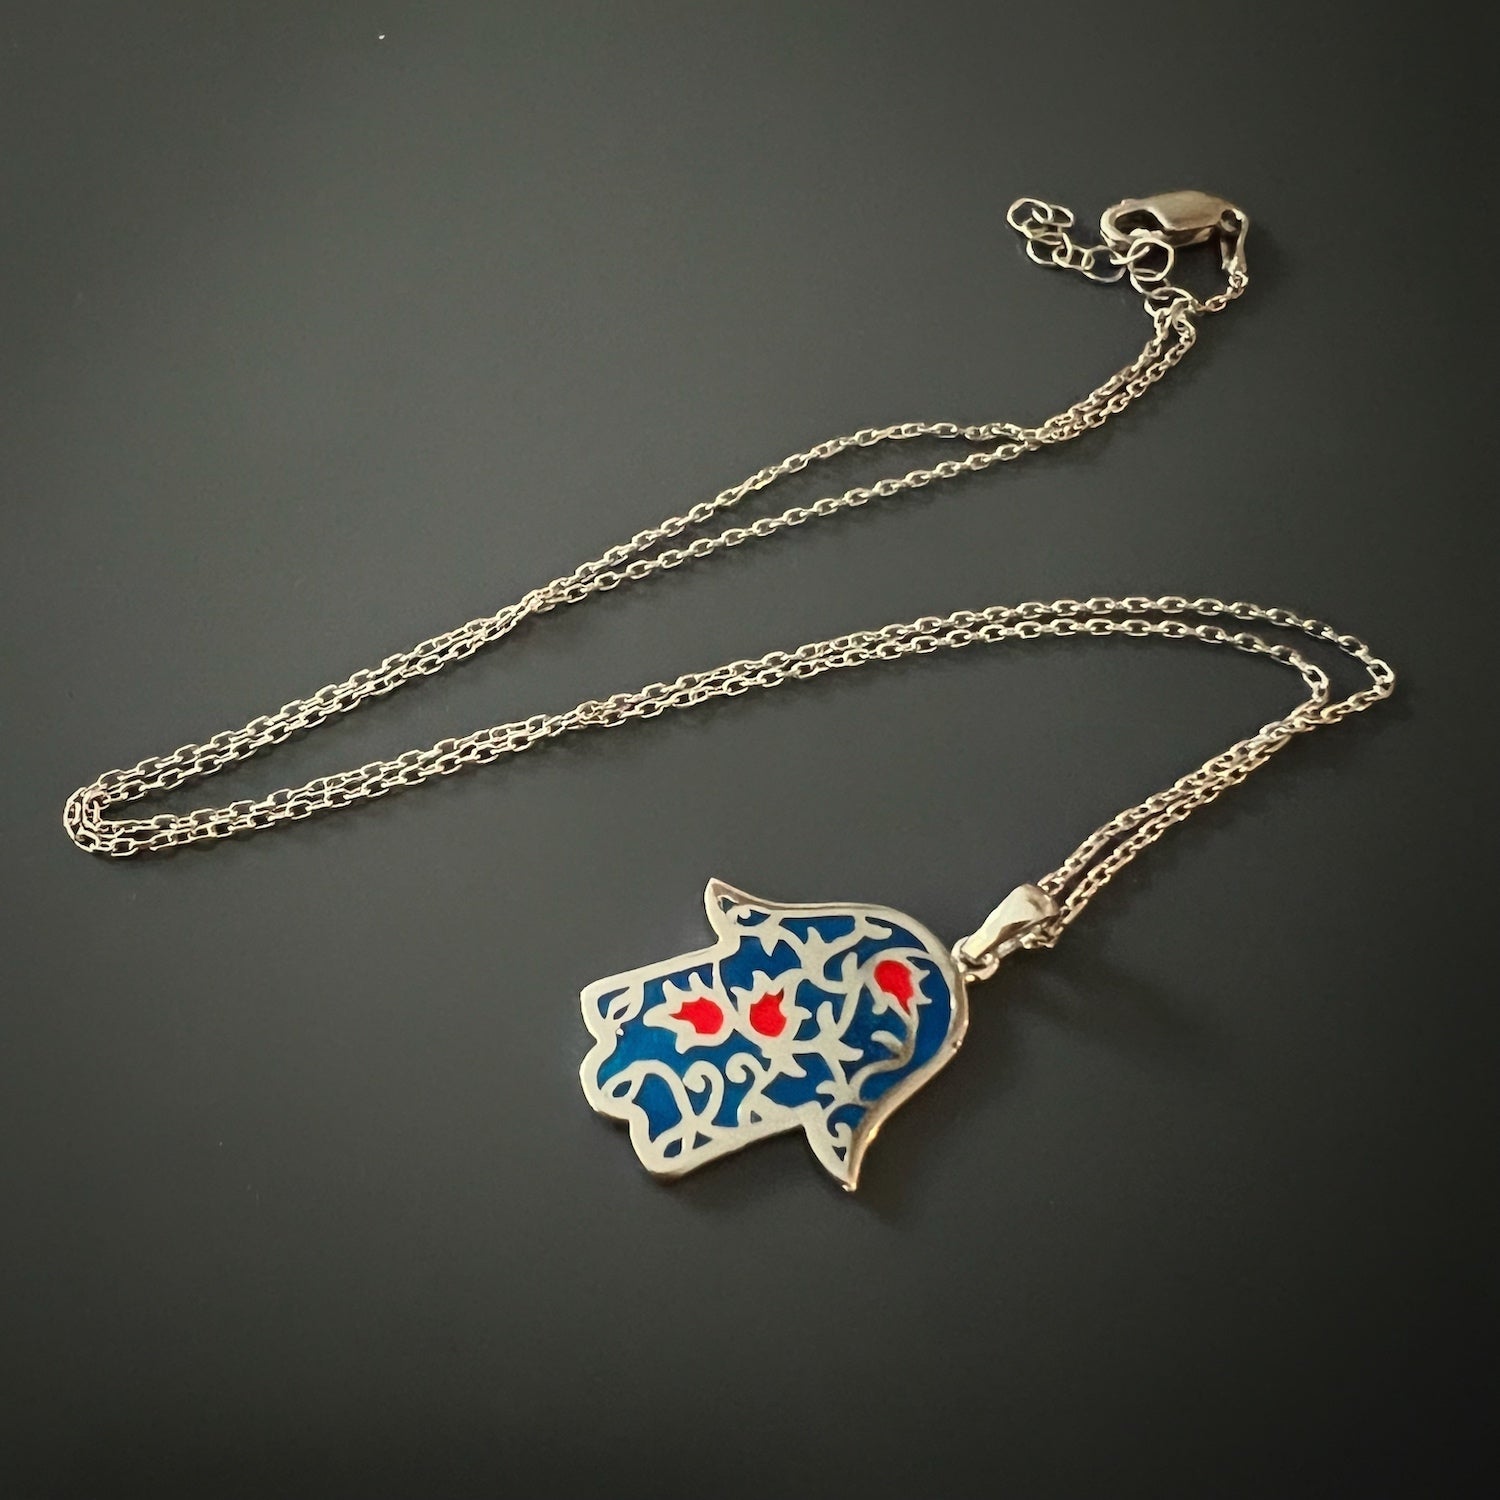 The Hamsa pendant, symbolizing protection and good vibes, on the Good Vibes Enamel Hamsa Necklace Silver.